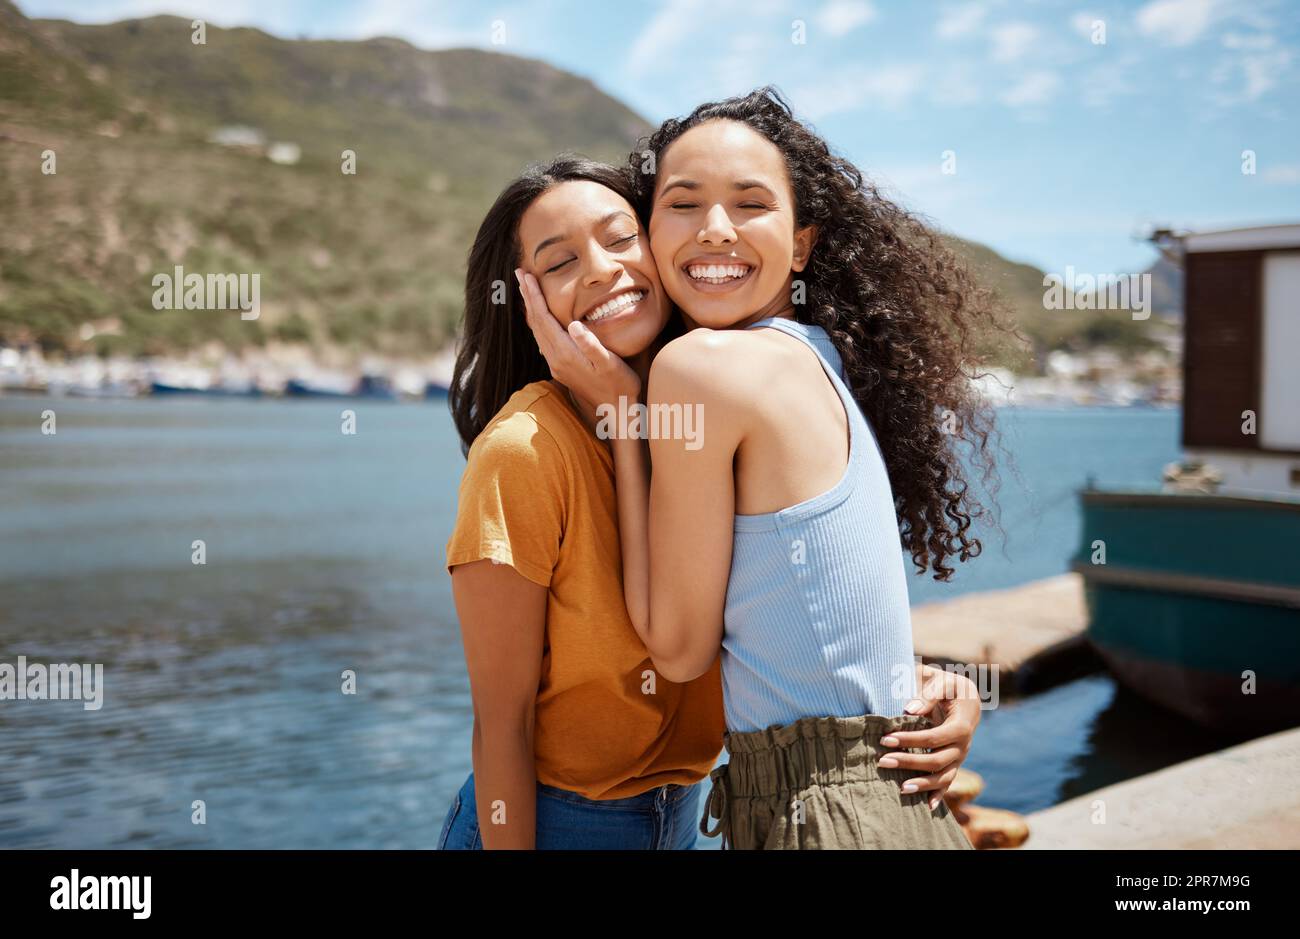 Find a weirdo just like you and never let them go. Portrait of two young women hanging out together outdoors. Stock Photo